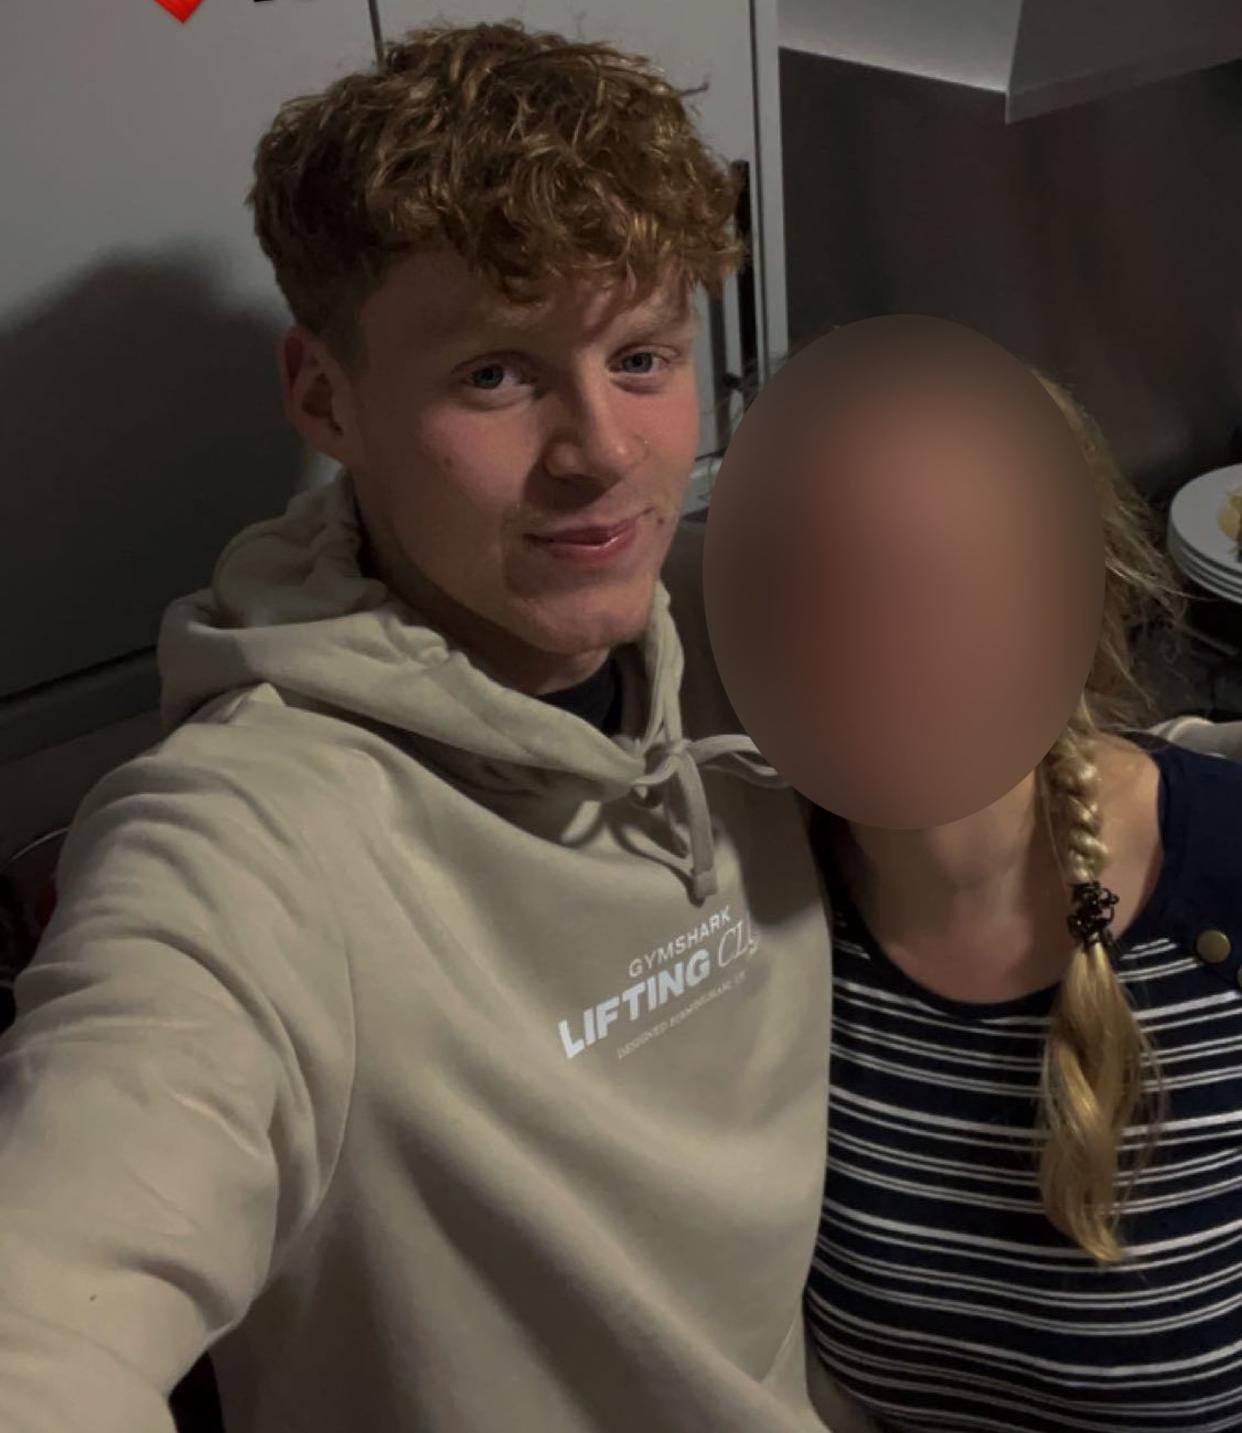 PIC FROM Kennedy News and Media (PICTURED: SACKED B&Q WORKER ADAM POWIS, 18)  A sacked B&Q worker has been banned from EVERY STORE in the UK - after branding his colleagues 'c**ts' and declaring 'f**k everyone' in an explosive final customer announcement. Adam Powis filmed himself as he broadcast his foul-mouthed farewell across the hardware giant's branch in Weston-super-Mare, North Somerset, on November 11. A viral video shot by the 18-year-old shows him calmly declaring 'this is a customer announcement. I just got sacked and B&Q are c**ts. F**k everyone. Have a nice day'. DISCLAIMER: While Kennedy News and Media uses its best endeavours to establish the copyright and authenticity of all pictures supplied, it accepts no liability for any damage, loss or legal action caused by the use of images supplied and the publication of images is solely at your discretion. SEE KENNEDY NEWS COPY - 0161 697 4266  